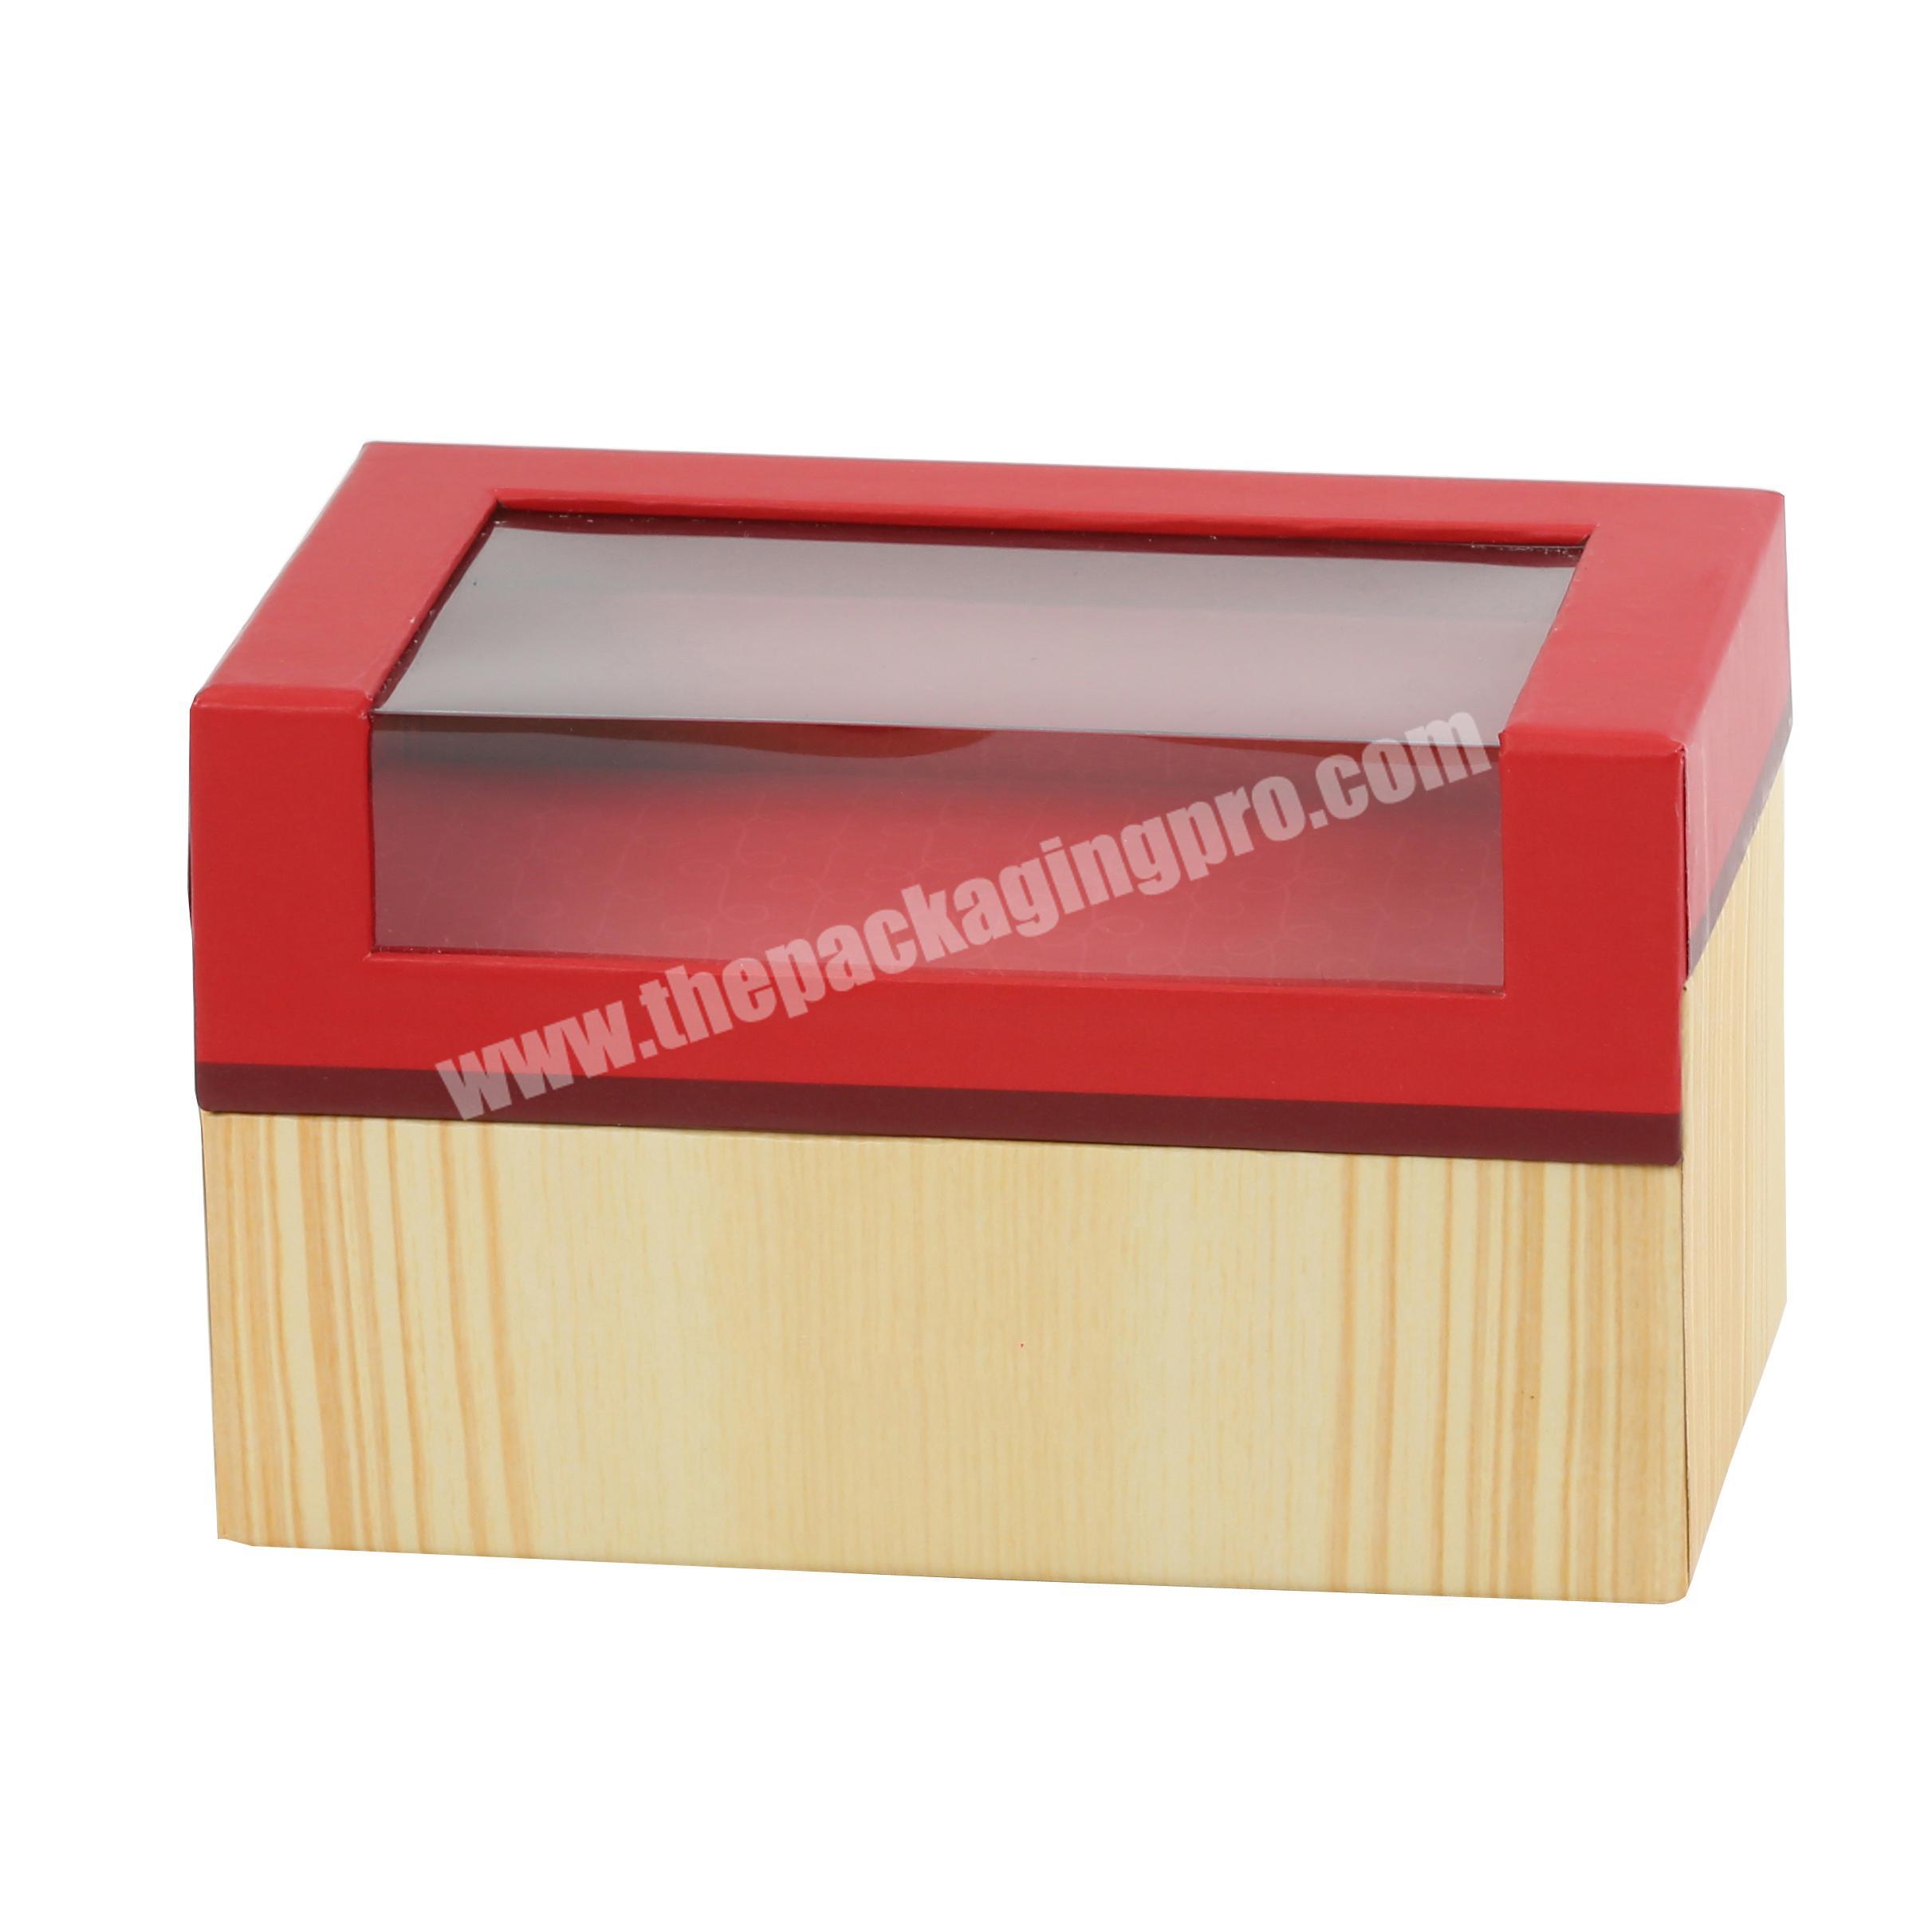 Hinged gift box in embossed texture paper with PVC window made by China packaging factory